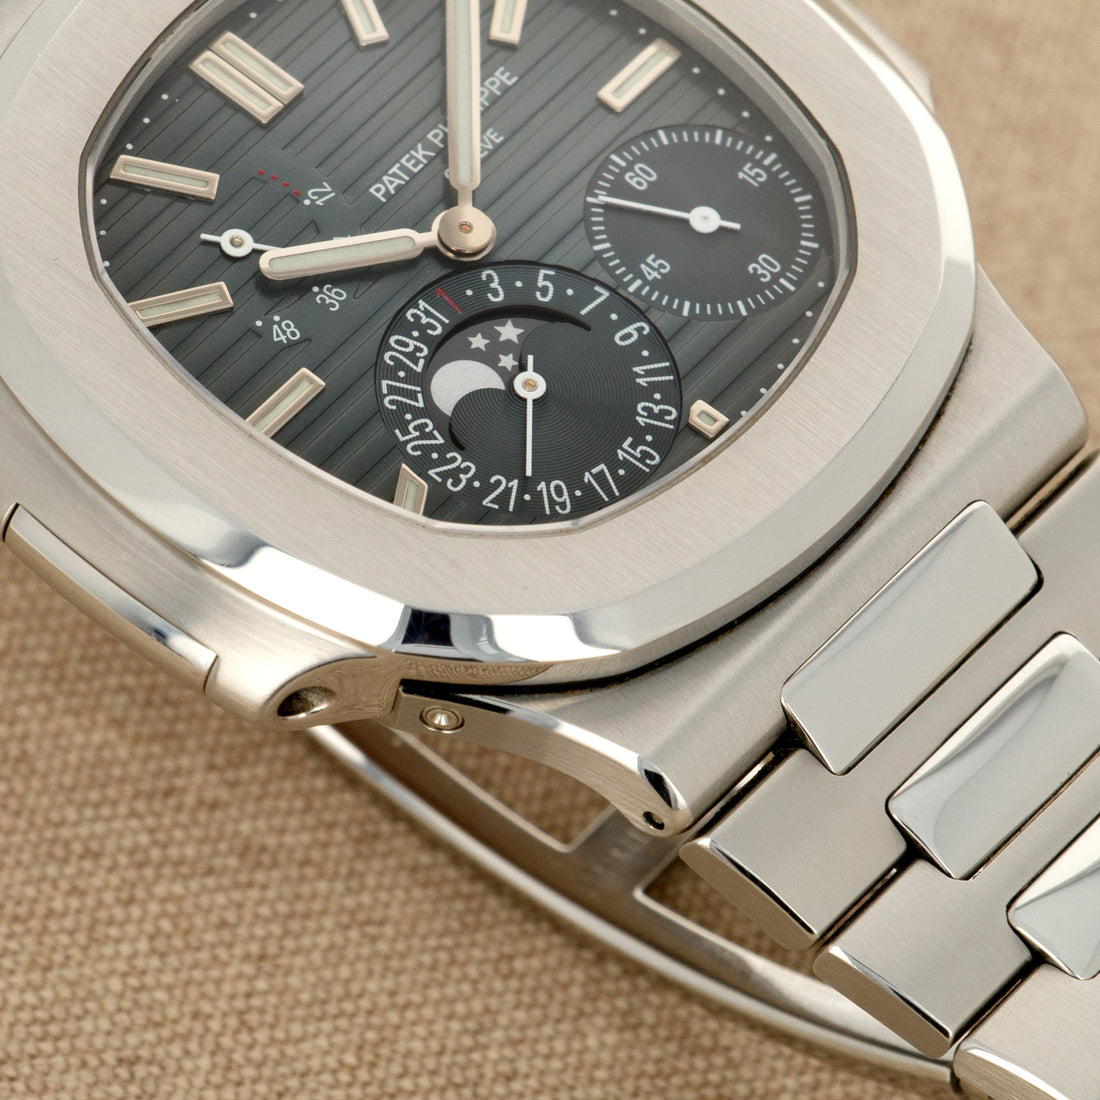 Patek Philippe Nautilus Moonphase Watch Ref. 5712 with Original Box and Papers